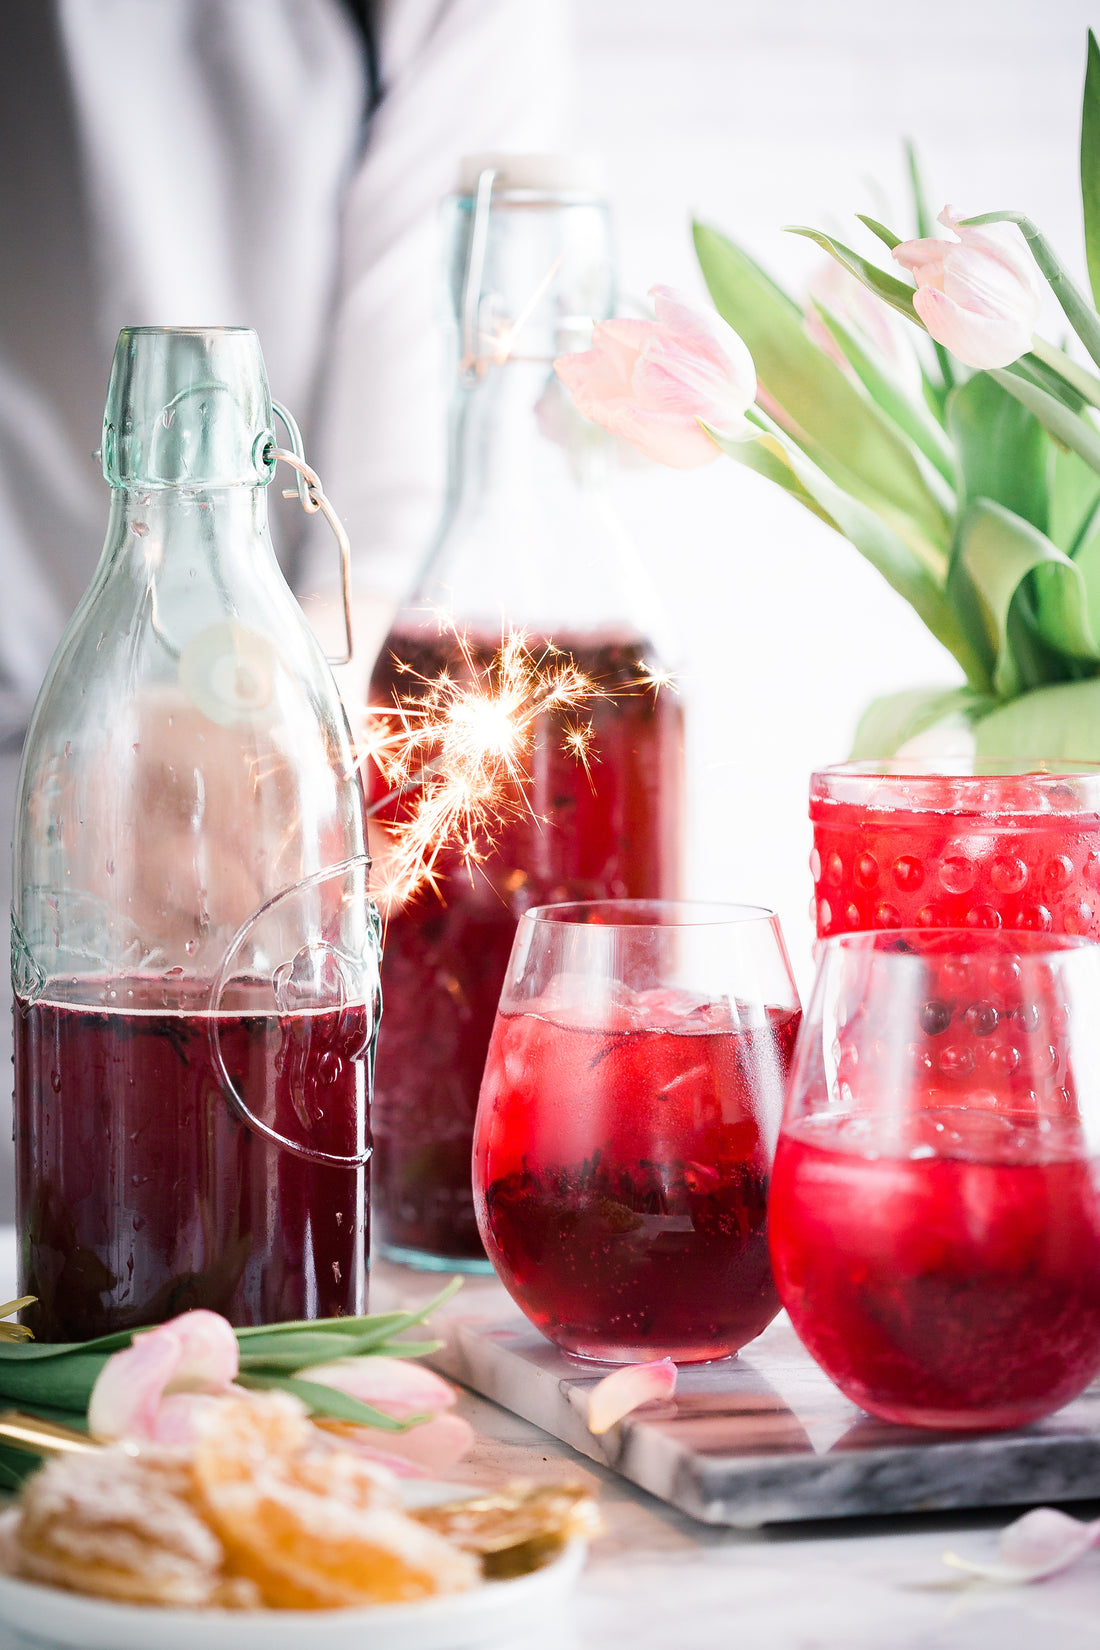 4TH OF JULY RECIPES + COCKTAILS WITHOUT THE GUILT